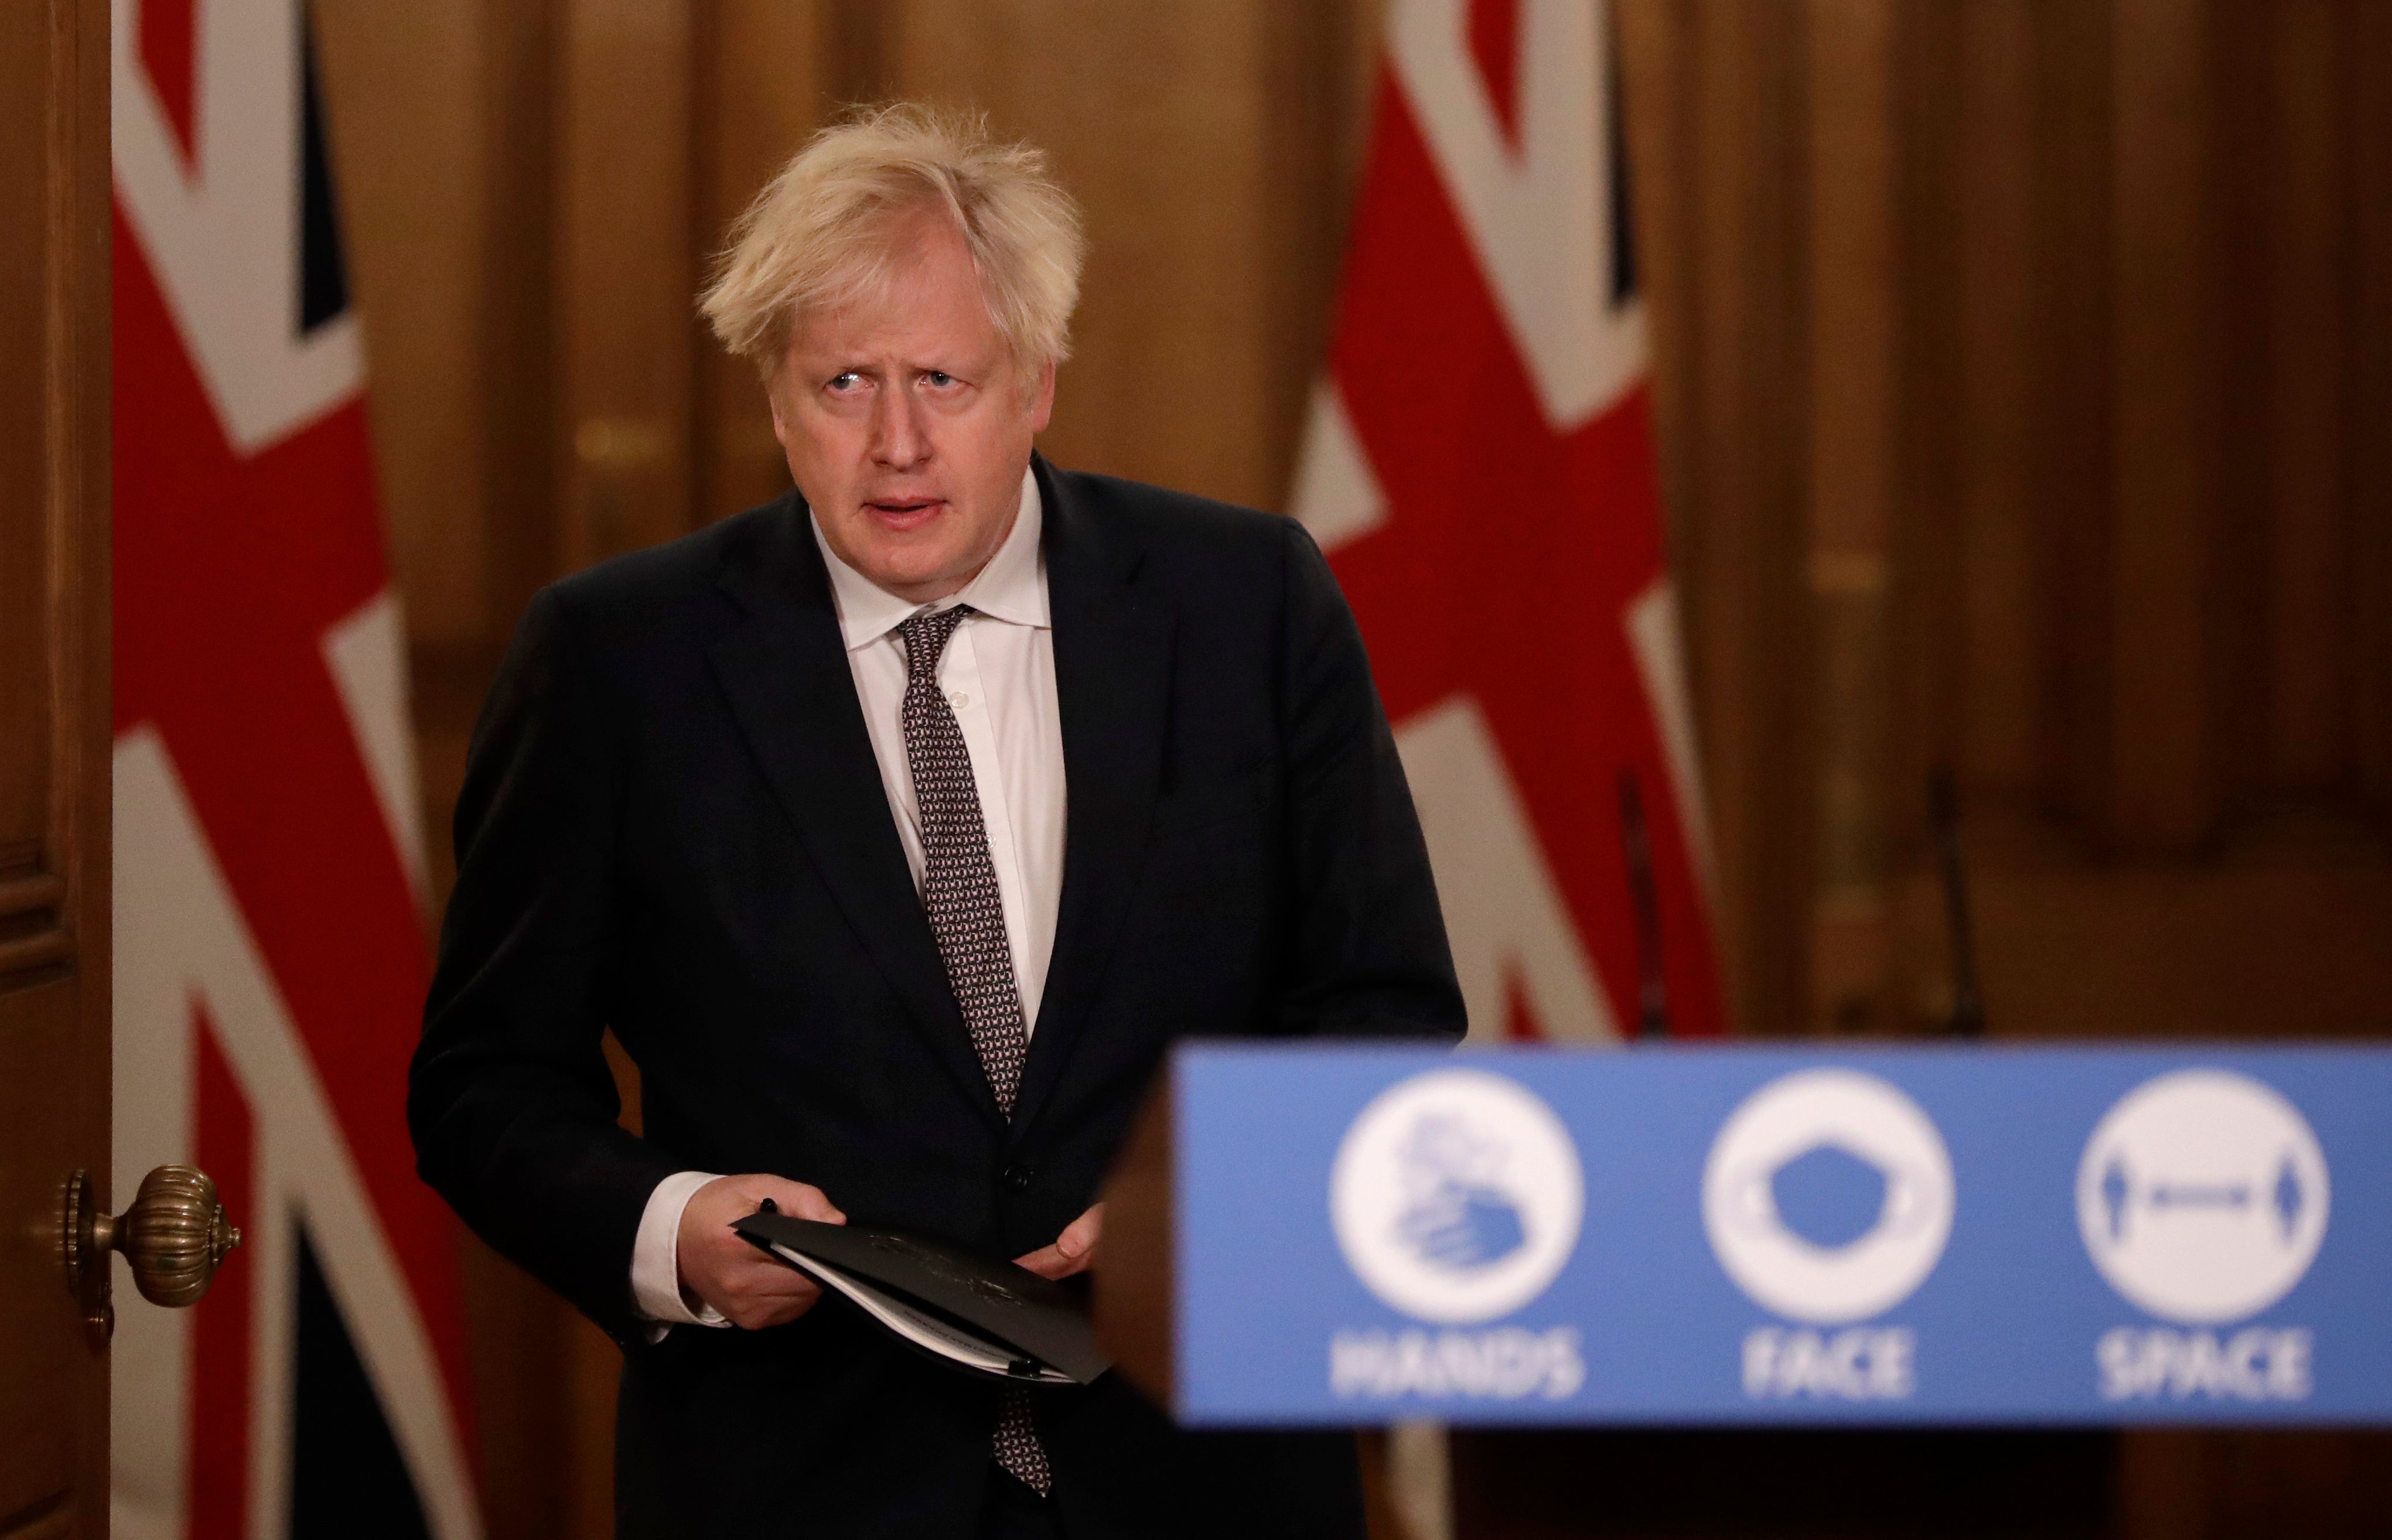 Boris Johnson needs to send a much clearer message to the public that this is a national emergency